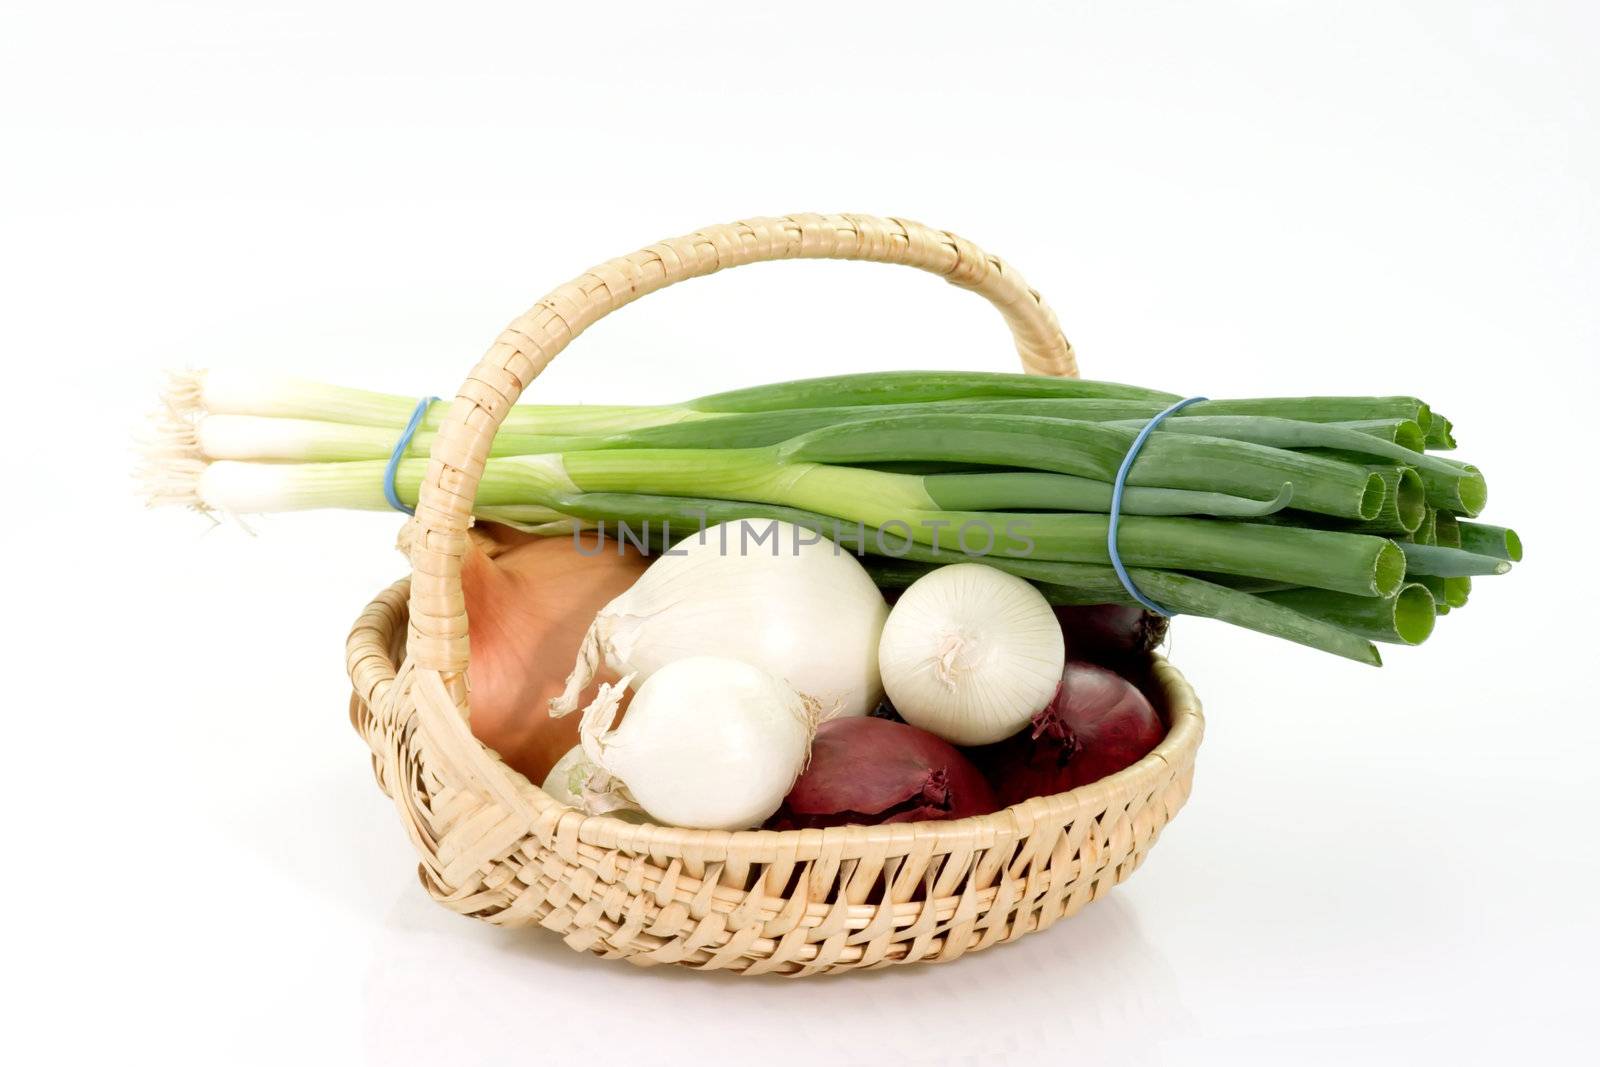 Four sorts of onions by Teamarbeit